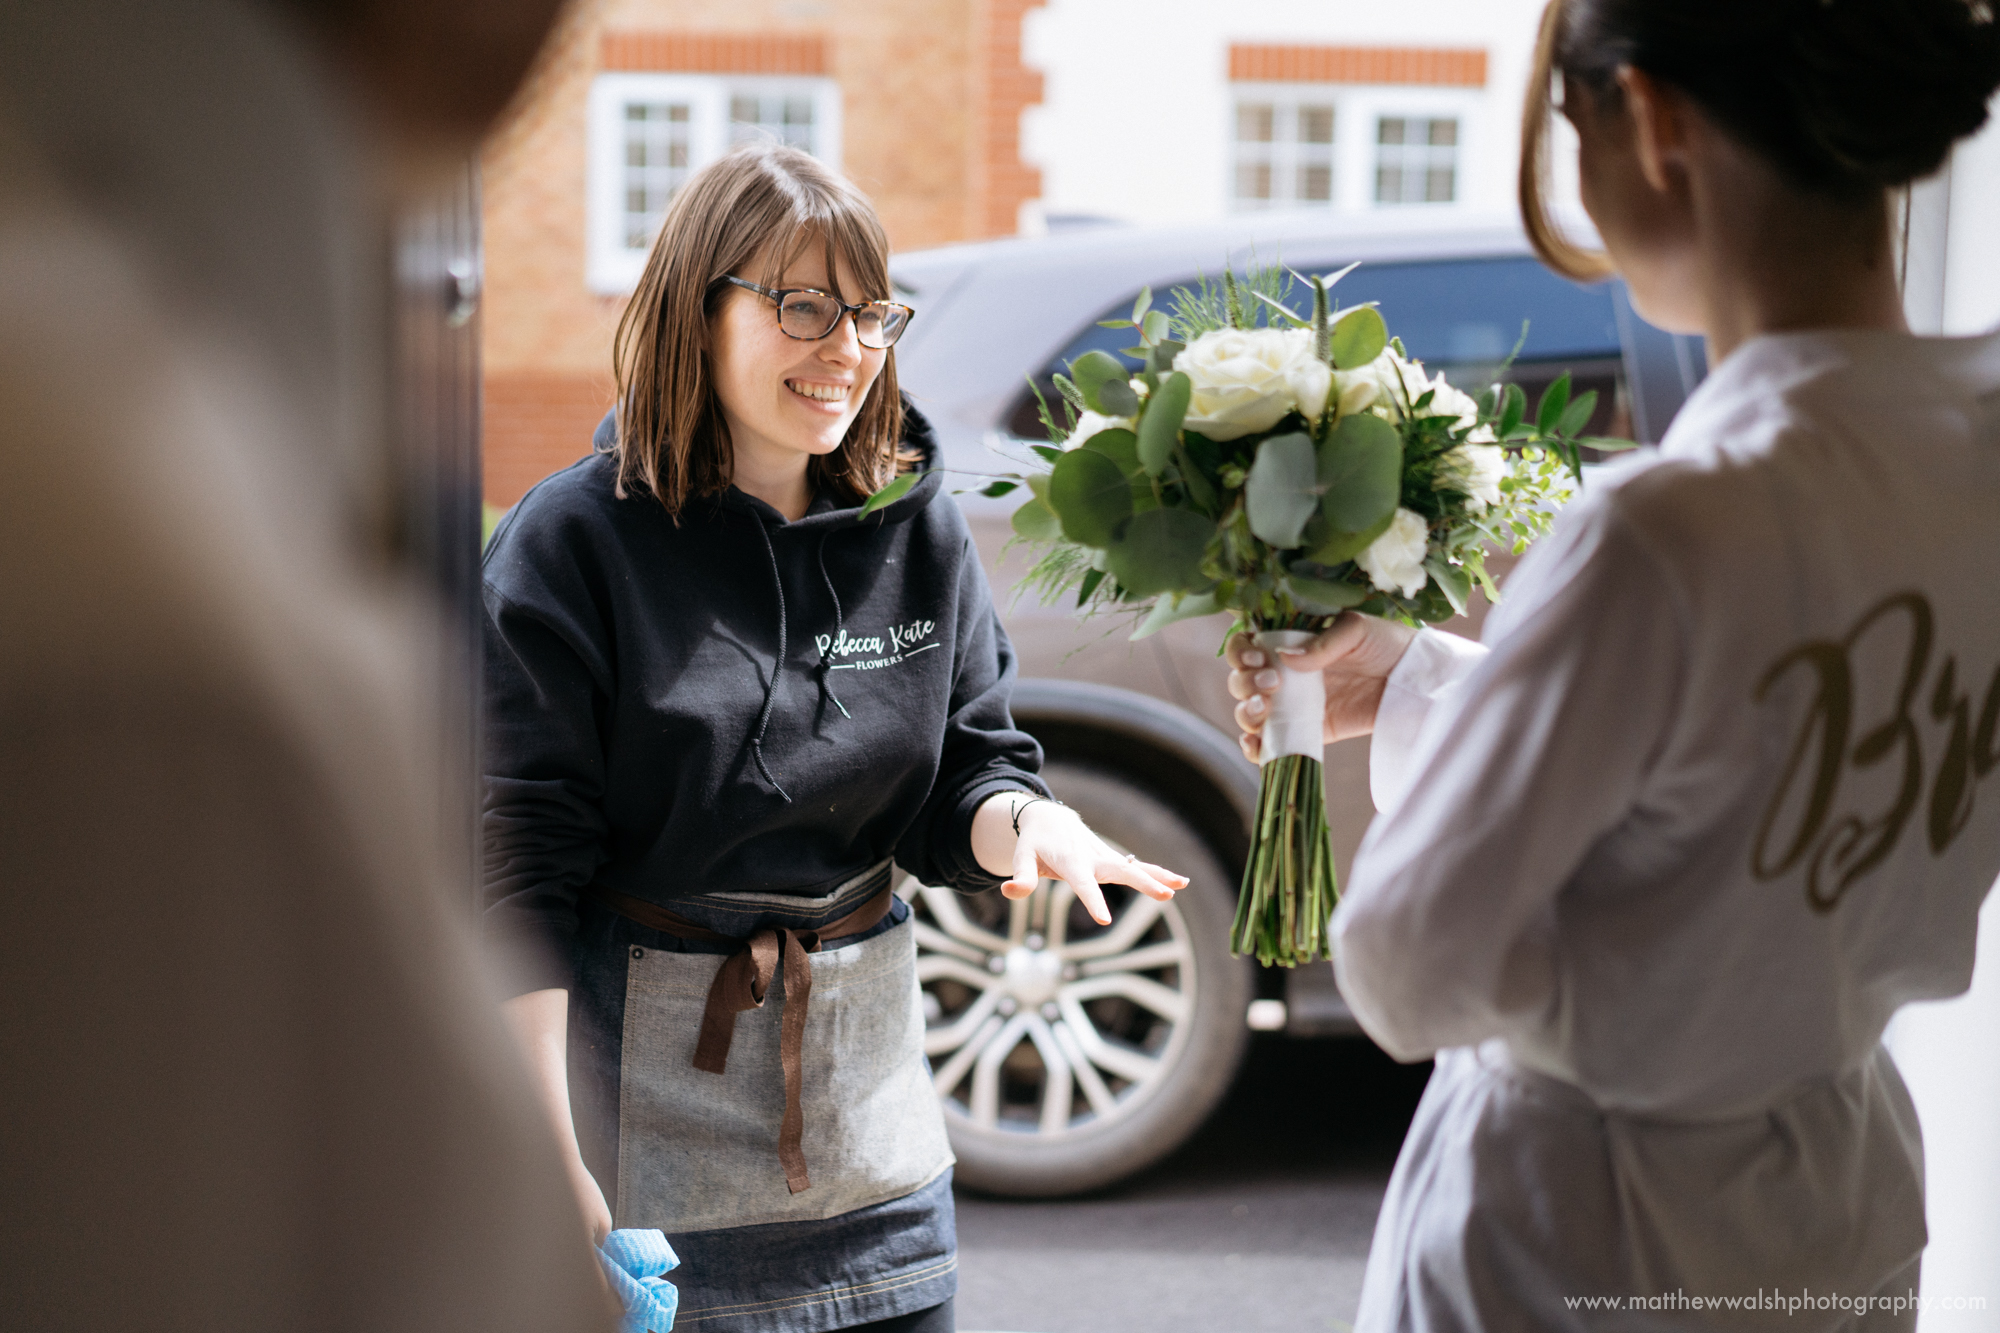 The florist Rebecca Kate Flowers arrives with the brides bouquet and other flowers